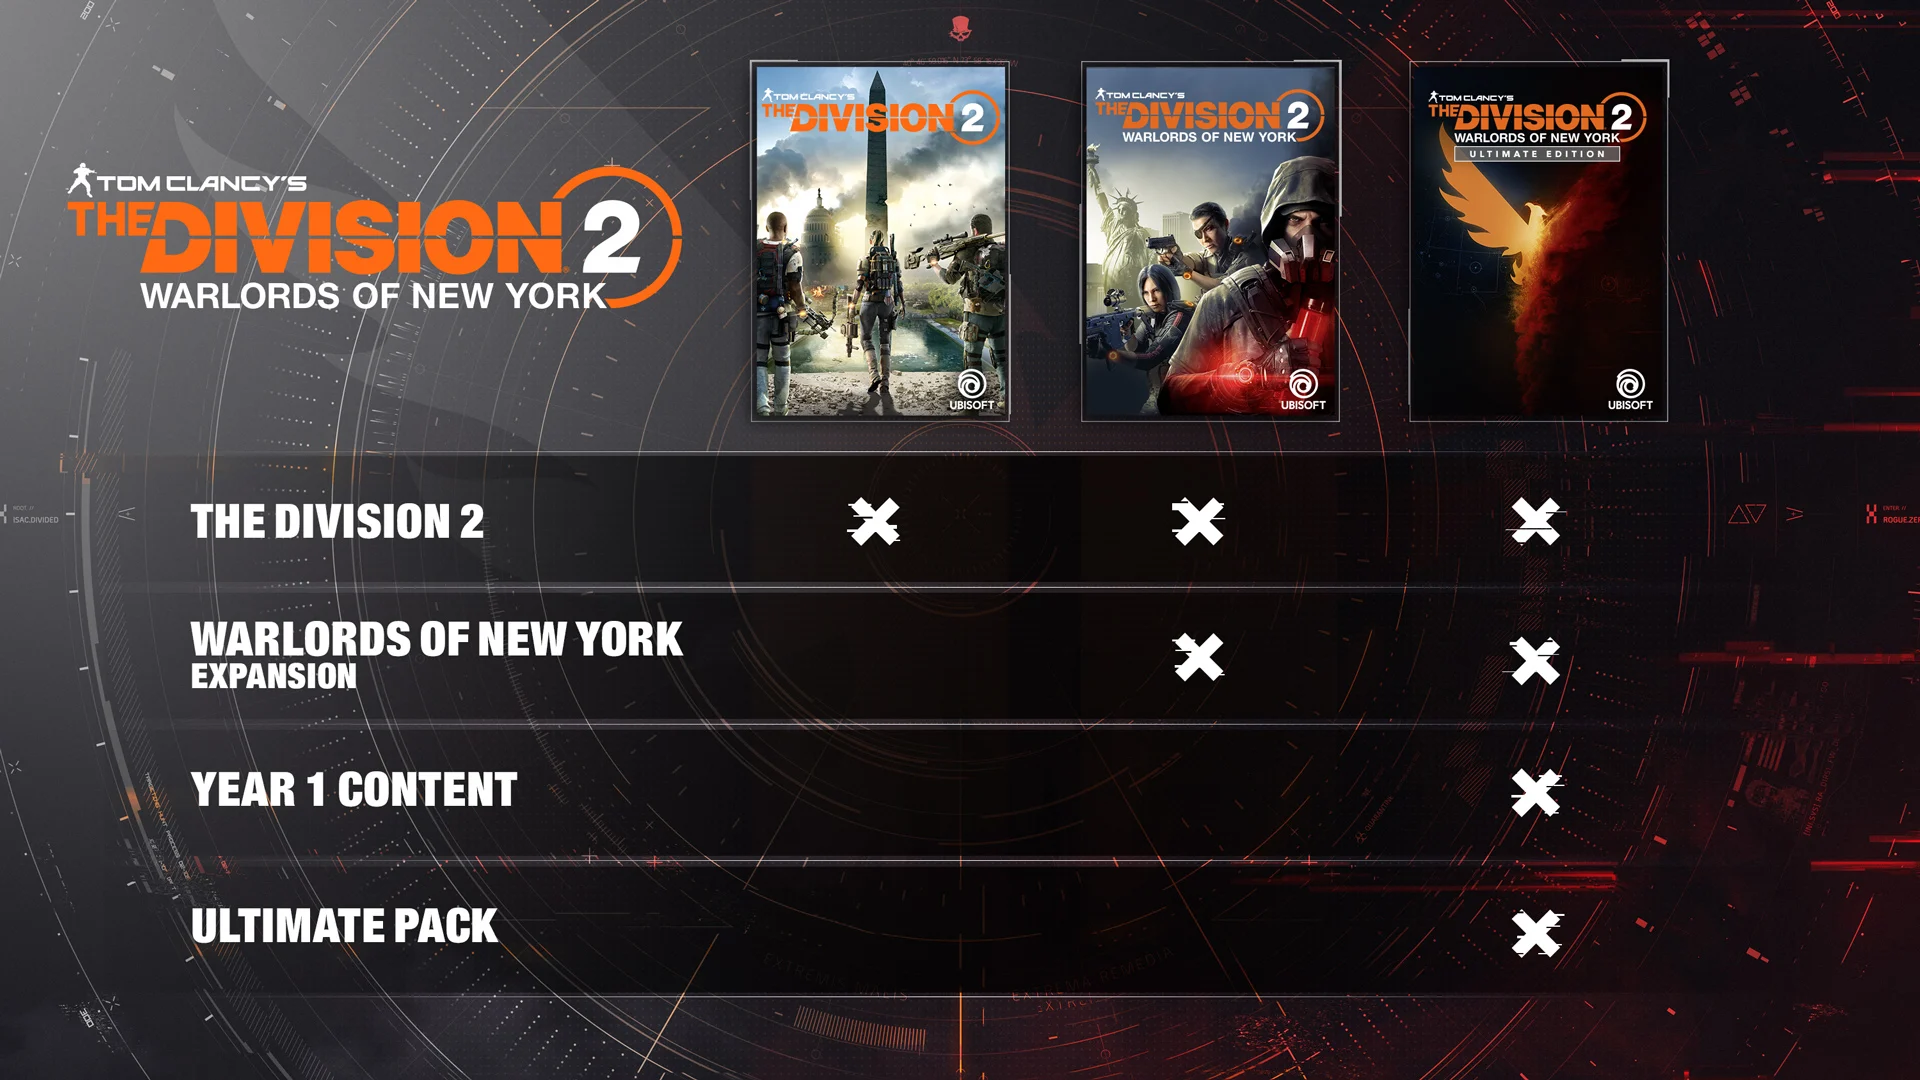 Tom Clancy s the Division 2 Воители Нью Йорка. The Division 2 - Warlords of New York - Ultimate Edition. The Division 2 -'Воители Нью-Йорка' – издание Ultimate Edition. Tom Clancy s the Division 2 дополнения. Tom clancy s ultimate edition